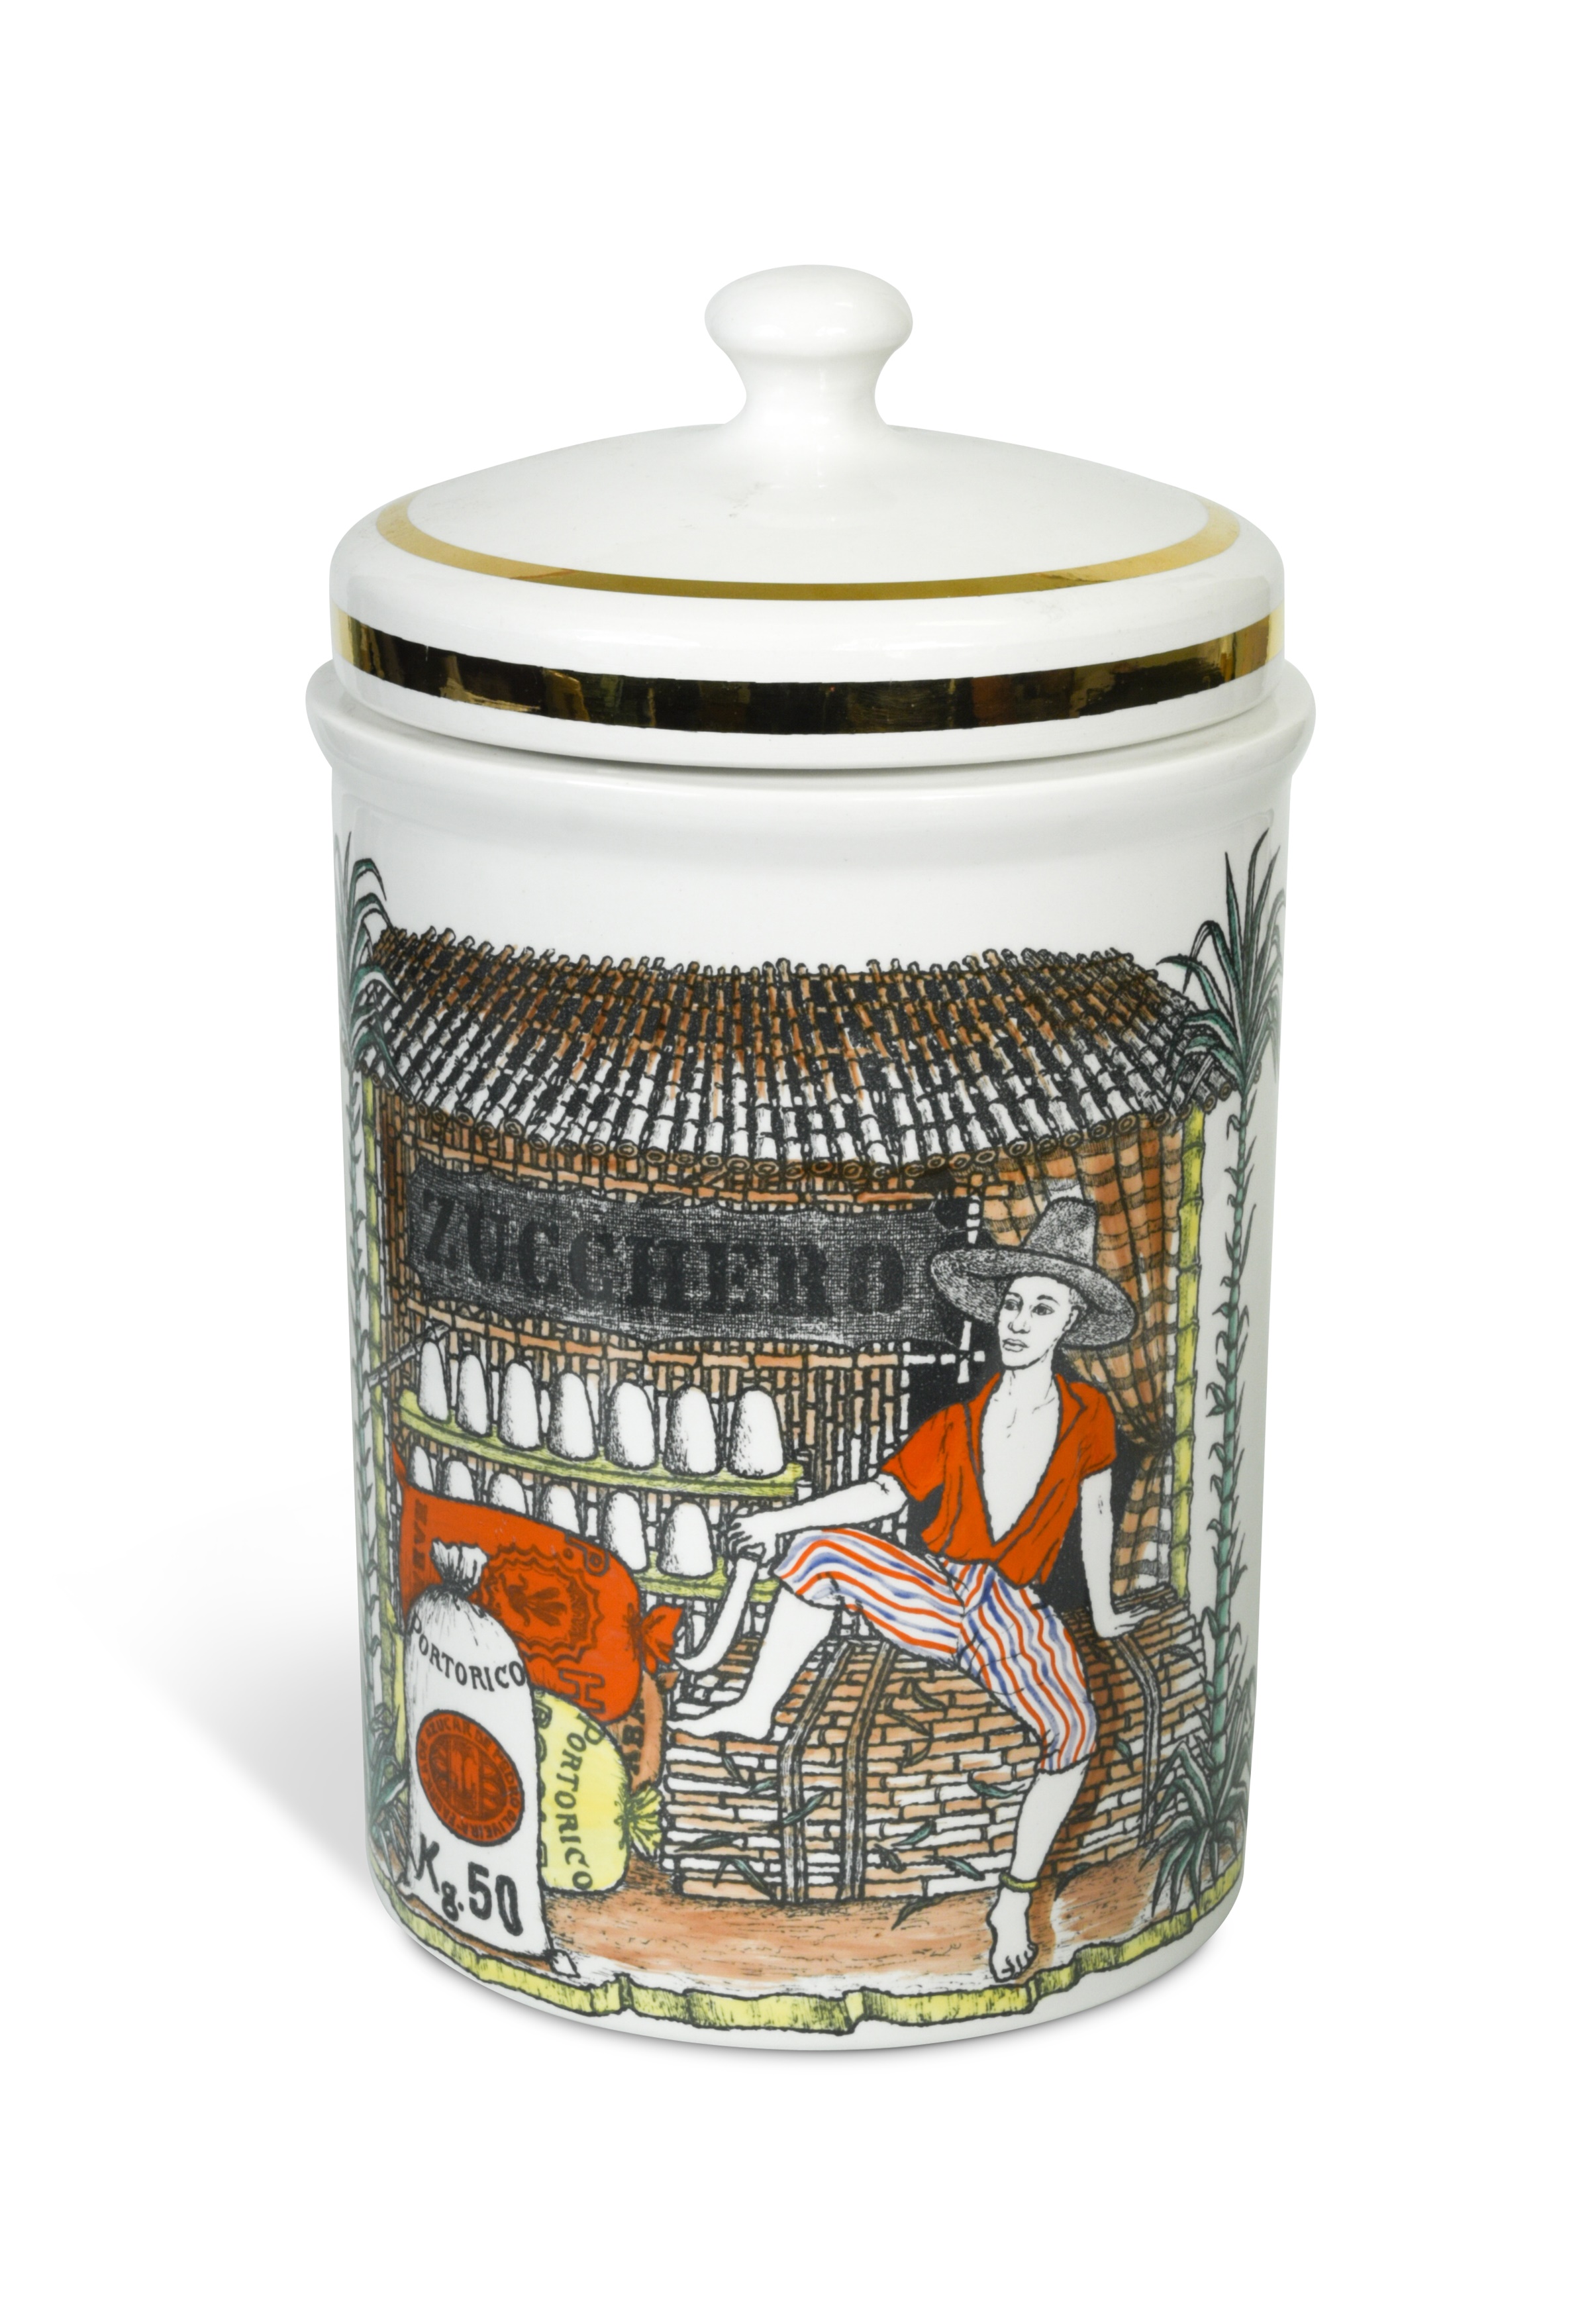 Piero Fornasetti for Fornasetti Milano, a transfer printed ceramic canister and cover,